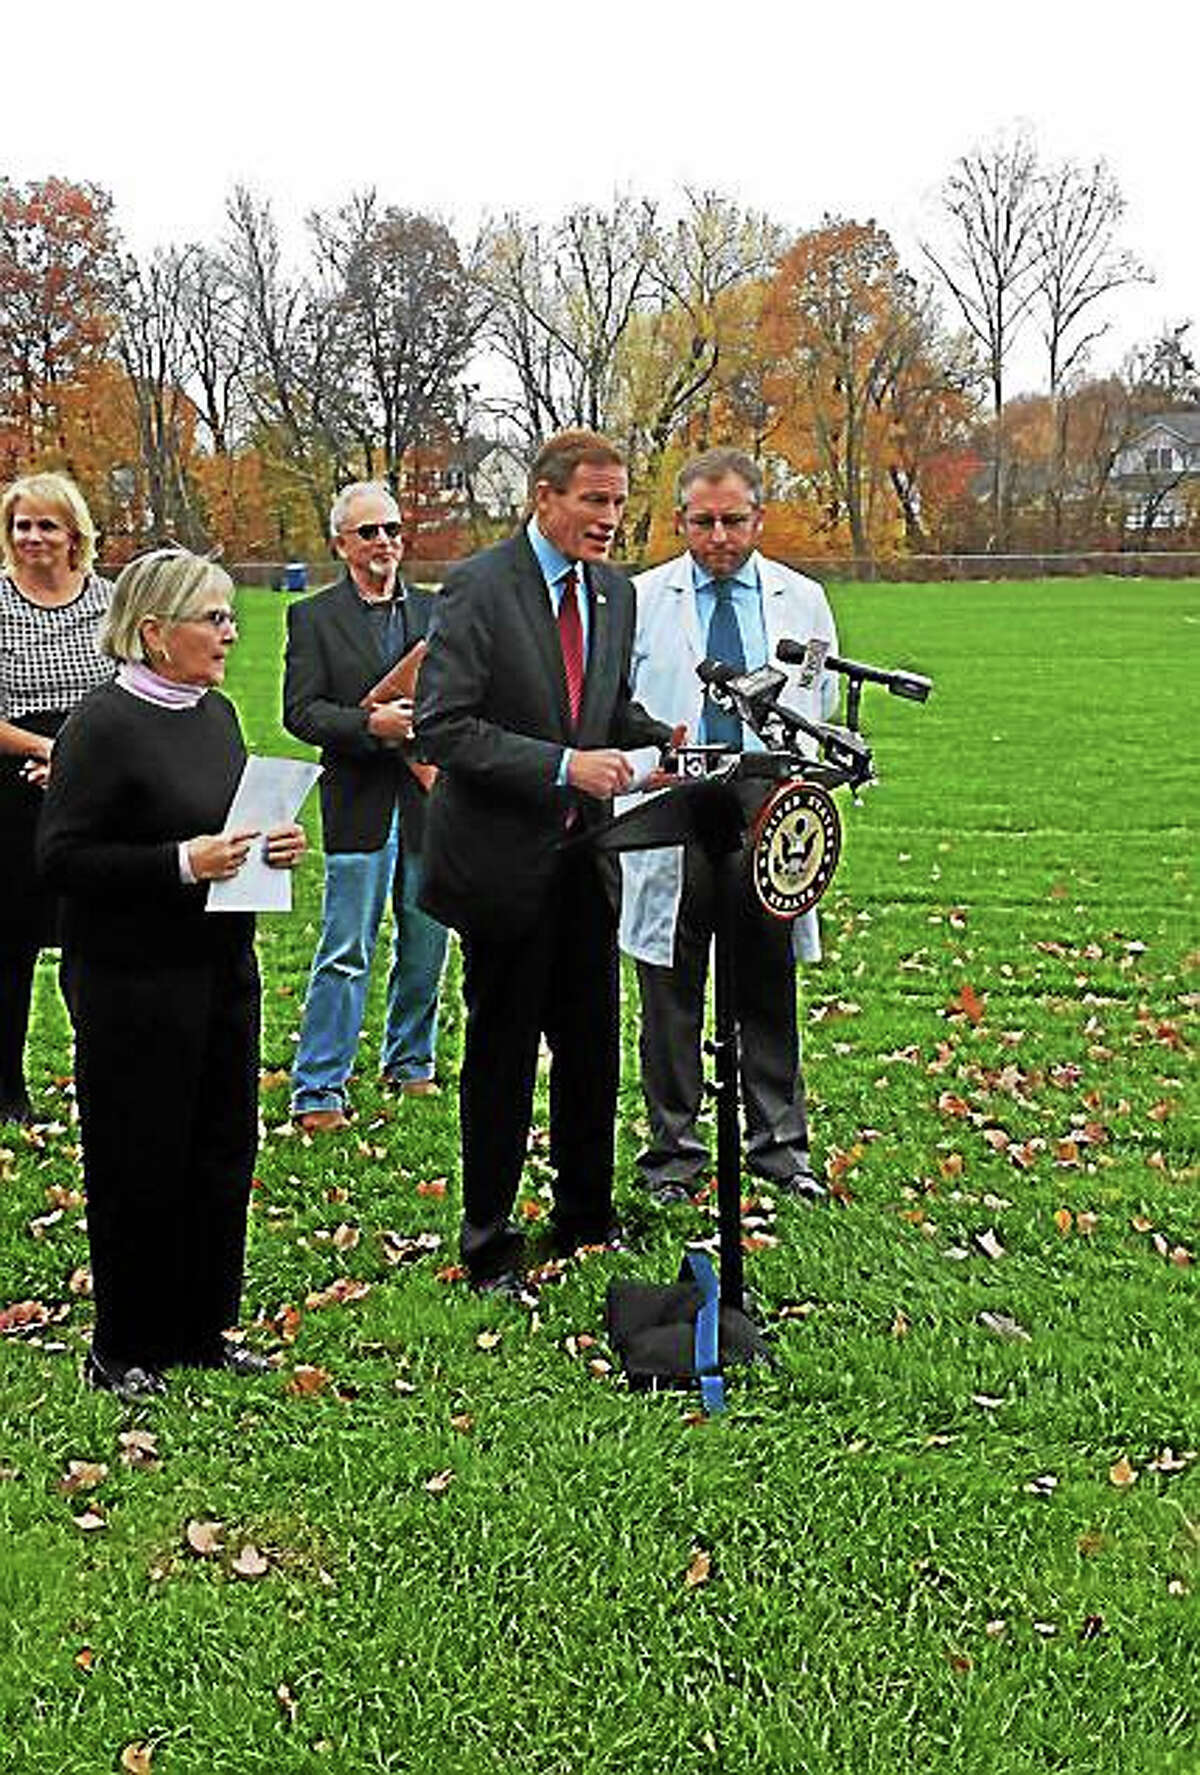 U.S. Sen. Richard Blumenthal, D-Connecticut, was joined by Nancy Alderman, left, of Environment and Health Inc. and Dr. Homero Horari of Mount Sinai Hospital in New York City to discuss the potential dangers of crumb rubber pieces in synthetic turf fields in West Hartford in November.